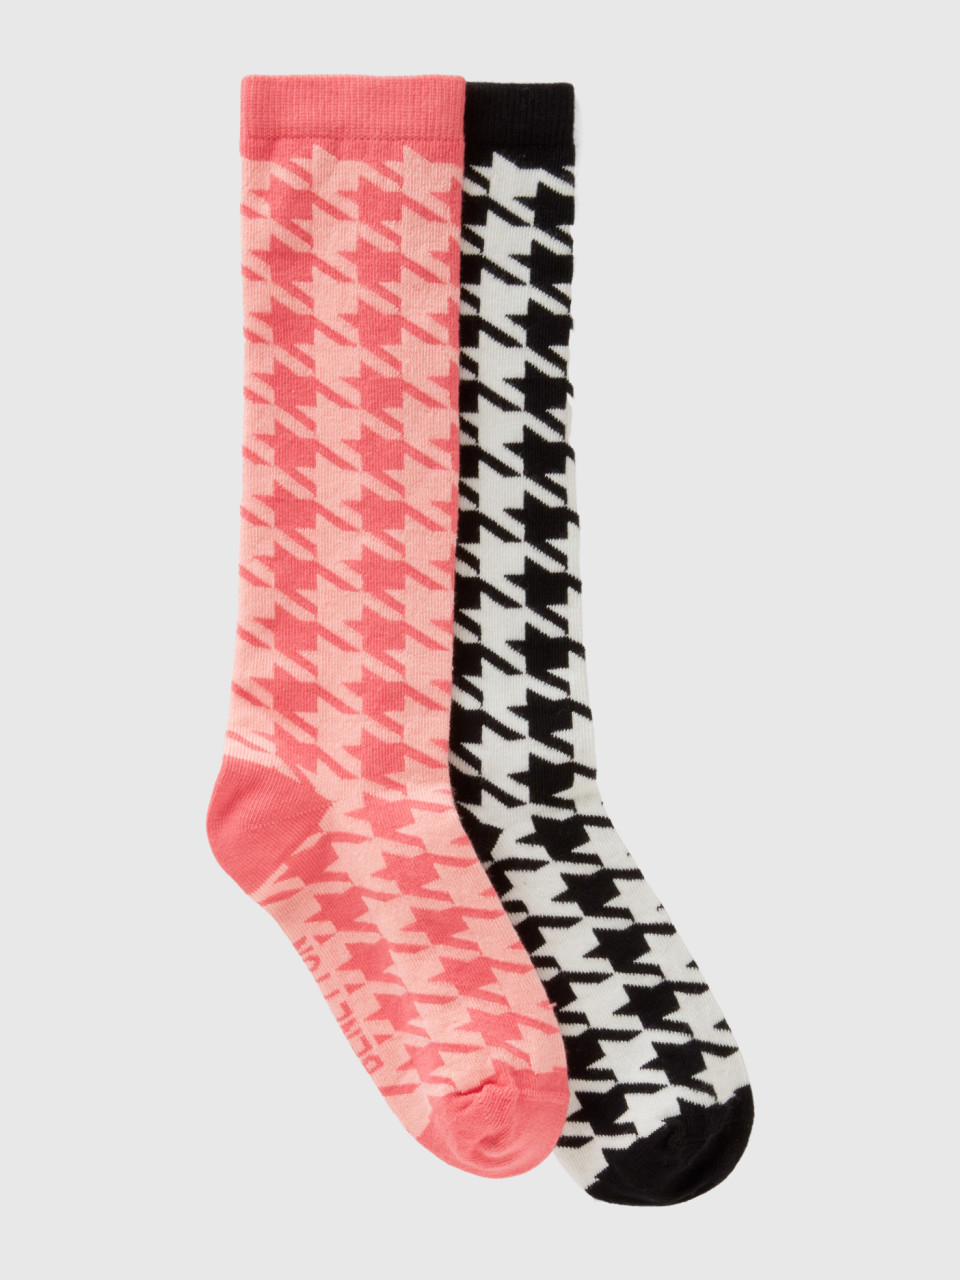 Benetton, Two Pairs Of Jacquard Houndstooth Socks, Multi-color, Kids